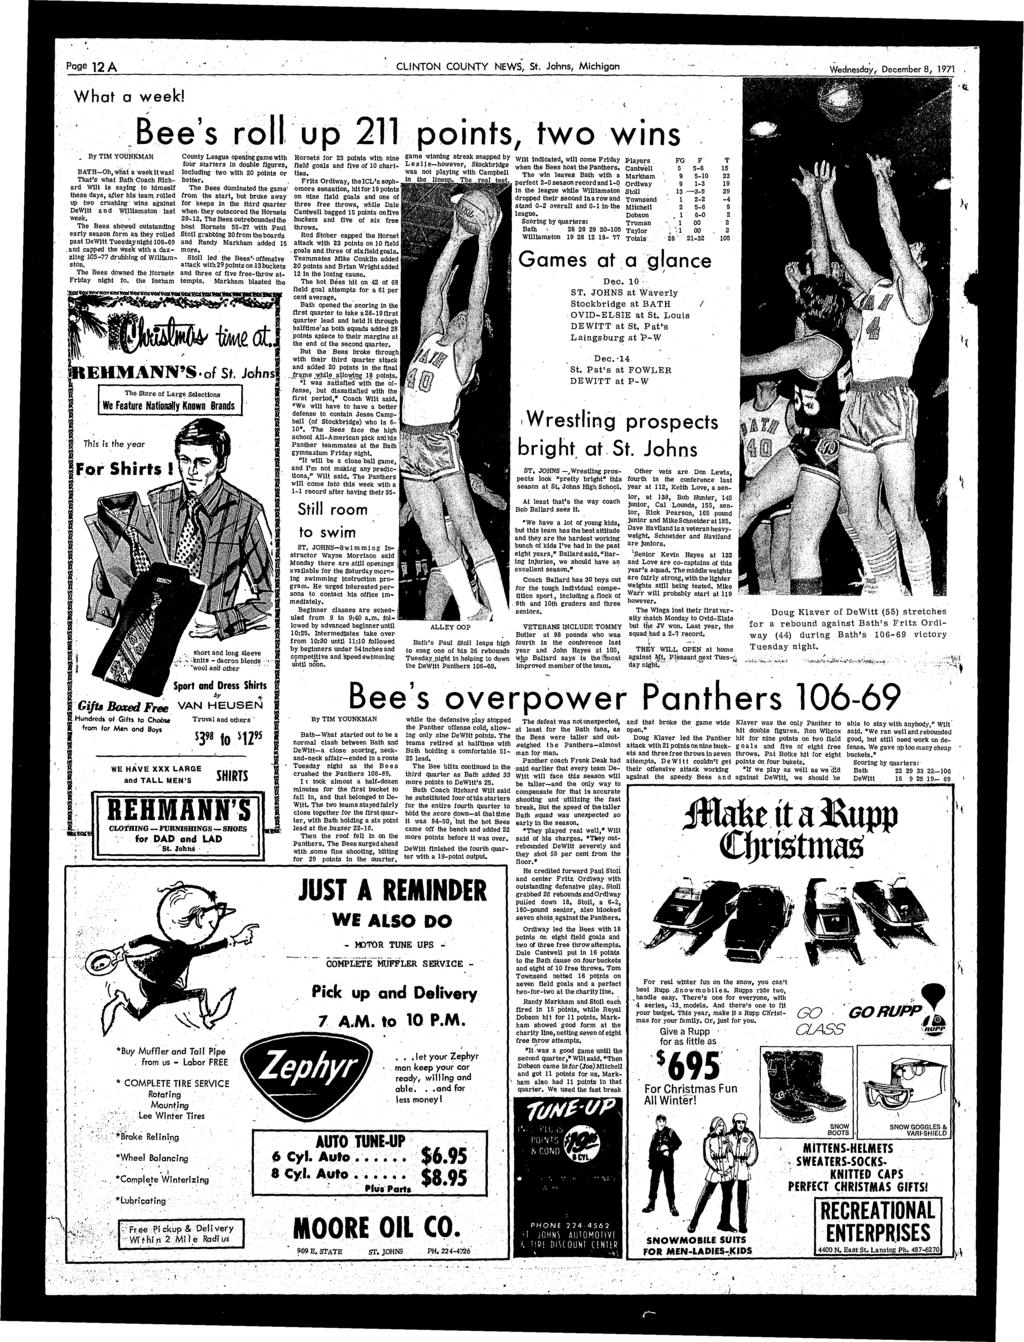 Page ]2A CLNTON COUNTY NEWS, St. Johns, Mchgan Wednesday, December 8, 1971 What a wee k! Bee's roll up 211 ponts, two wns By TM YOUNKMAN BATH-Oh, what a week twas!